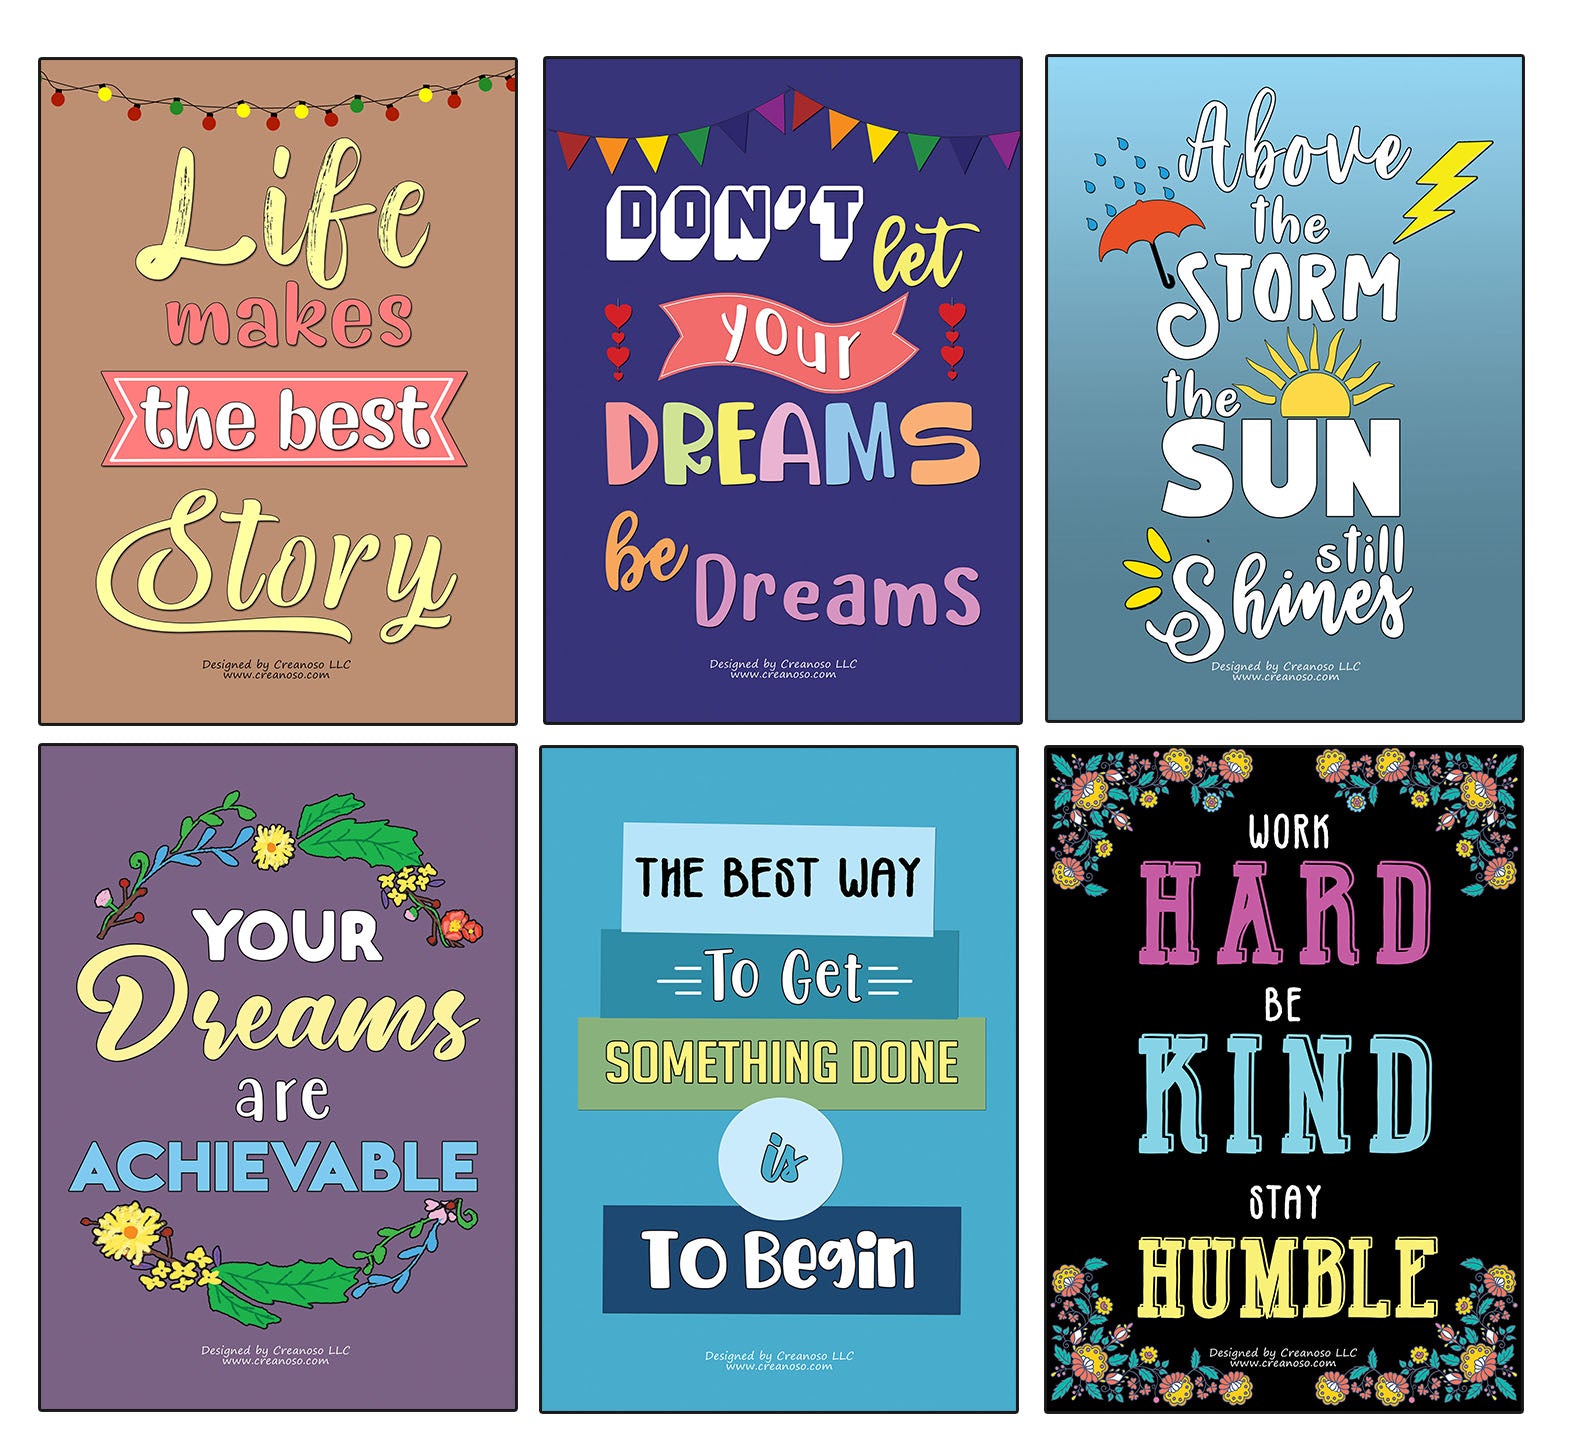 Creanoso Inspirational Quote & Saying Poster Prints (24-Pack) - Stocking Stuffers Gifts for Men Women Professionals Adults â€“ Cool Wall Art Decal DÃ©cor for Home Office Classroom Storage Room â€“ Great for Wall Hanging